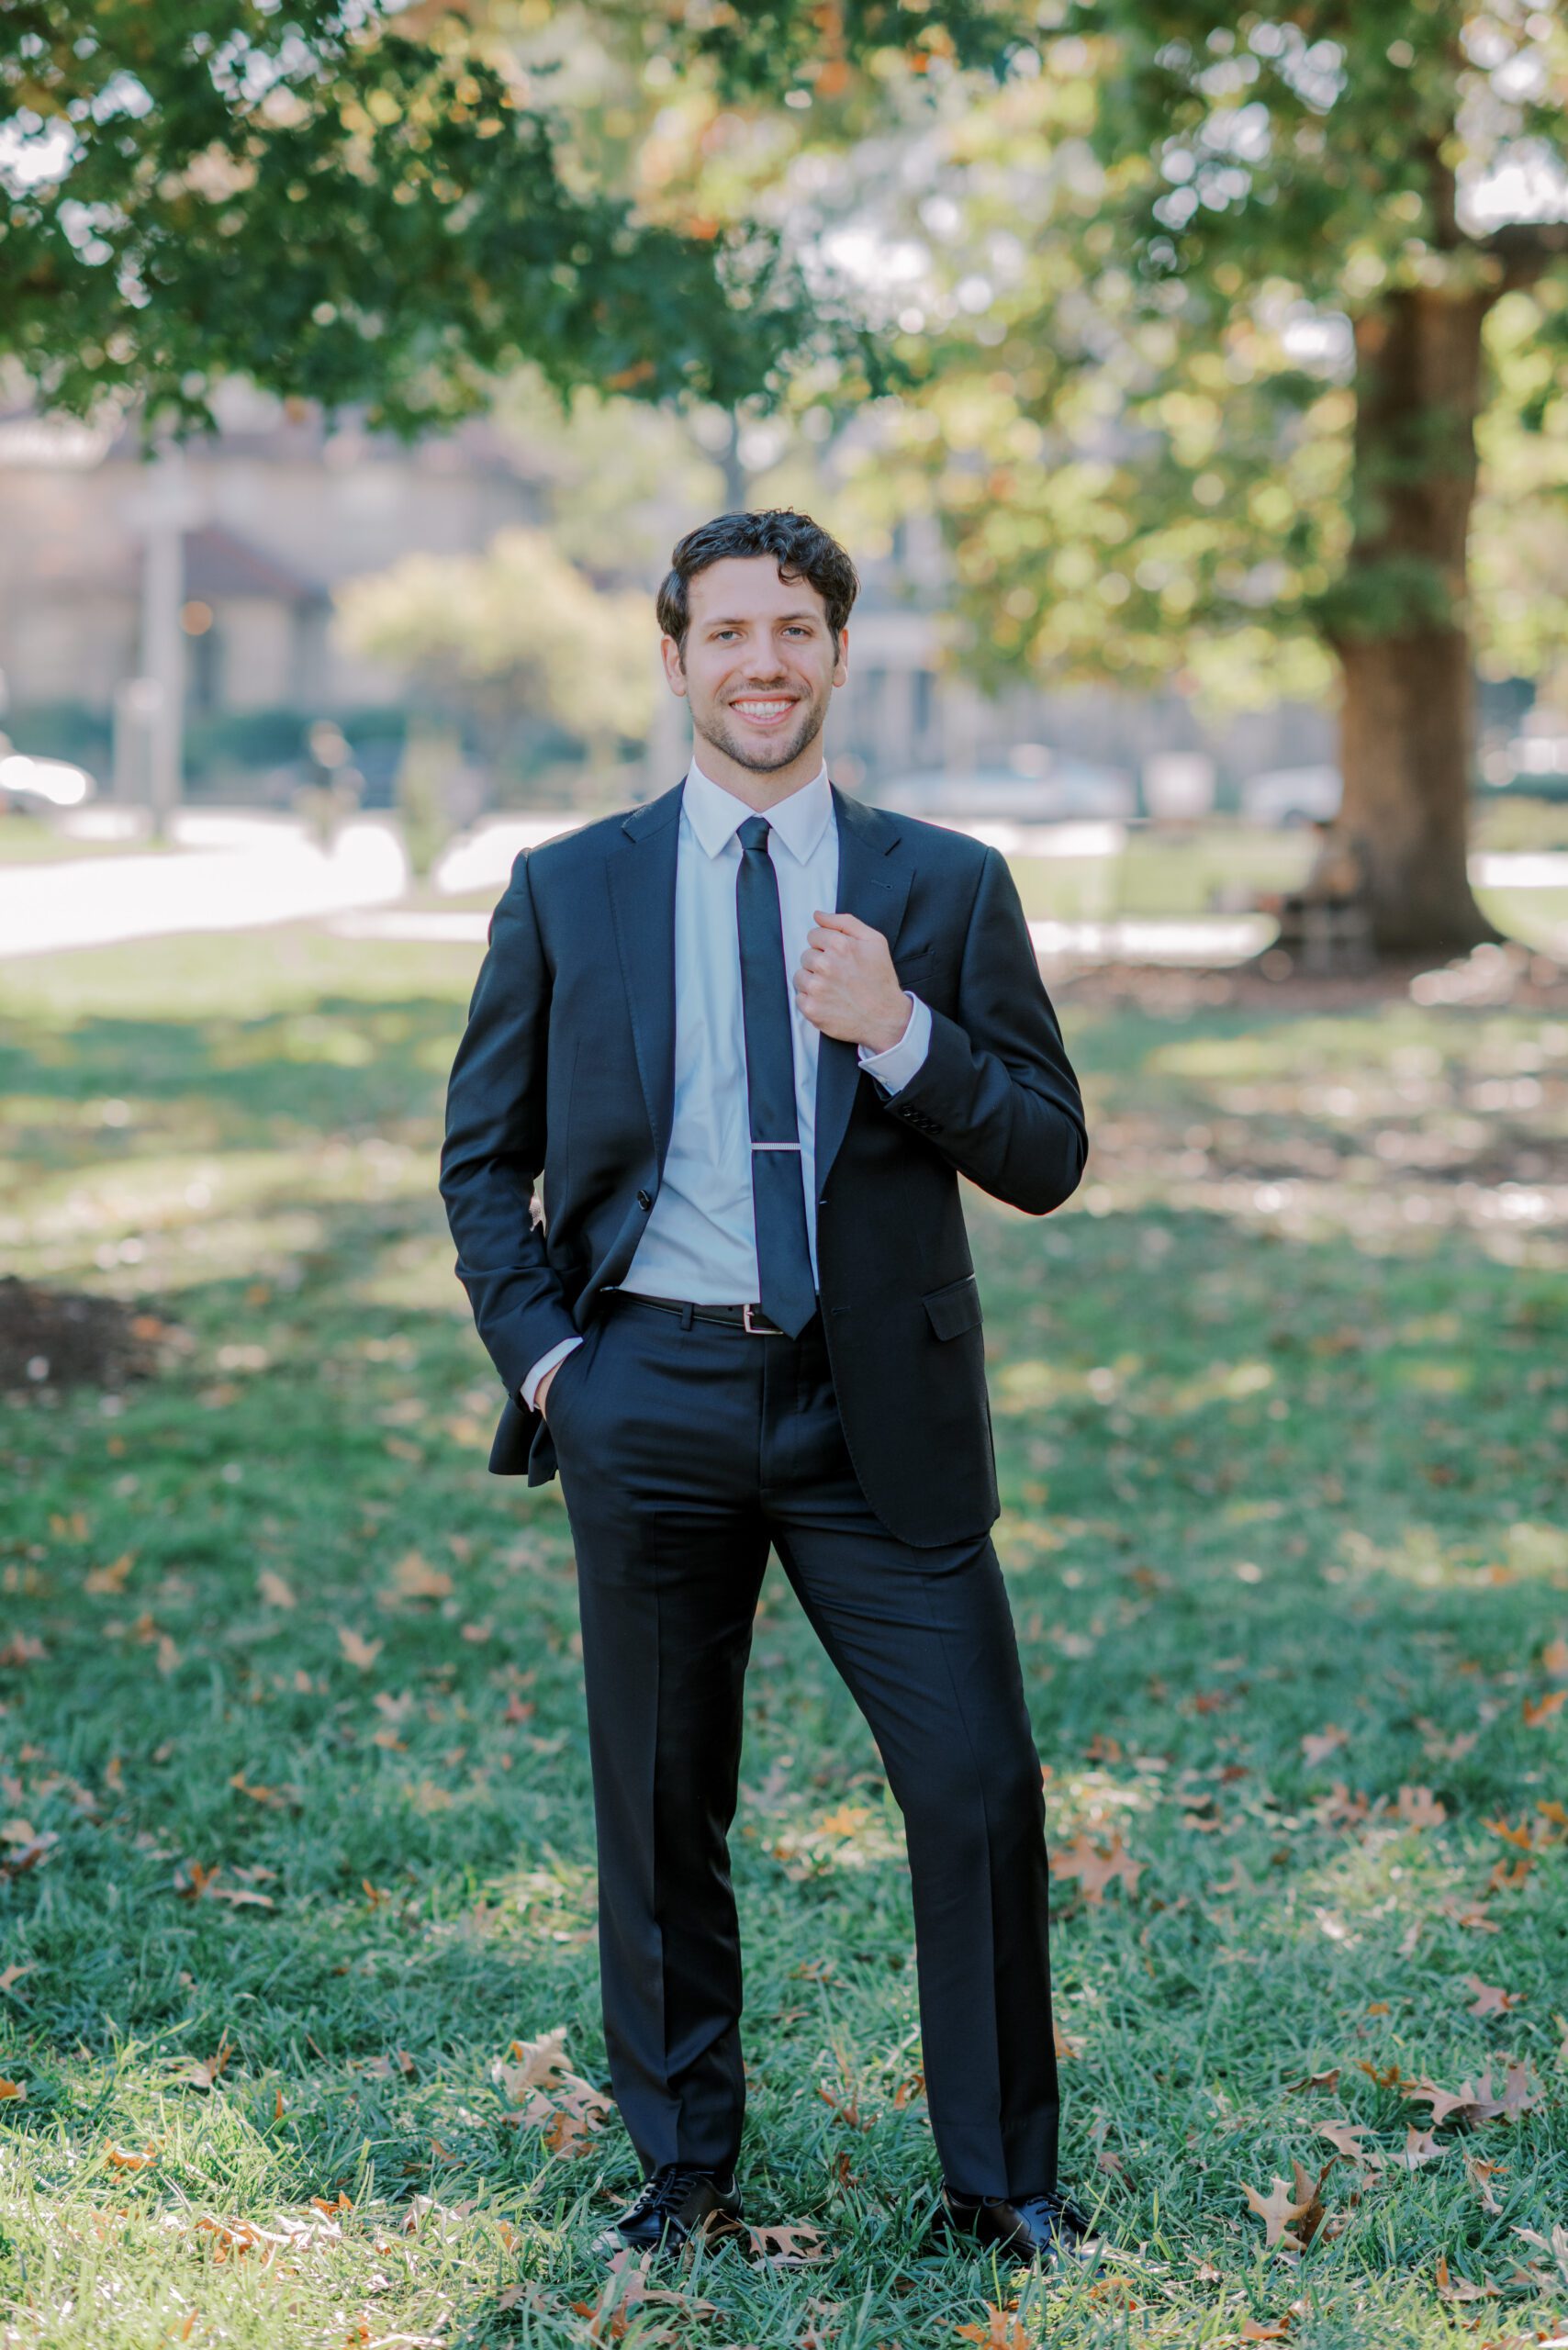 Solo photo of groom dressed in his suit, holding onto his jacket with one hand while his other hand is in his pocket